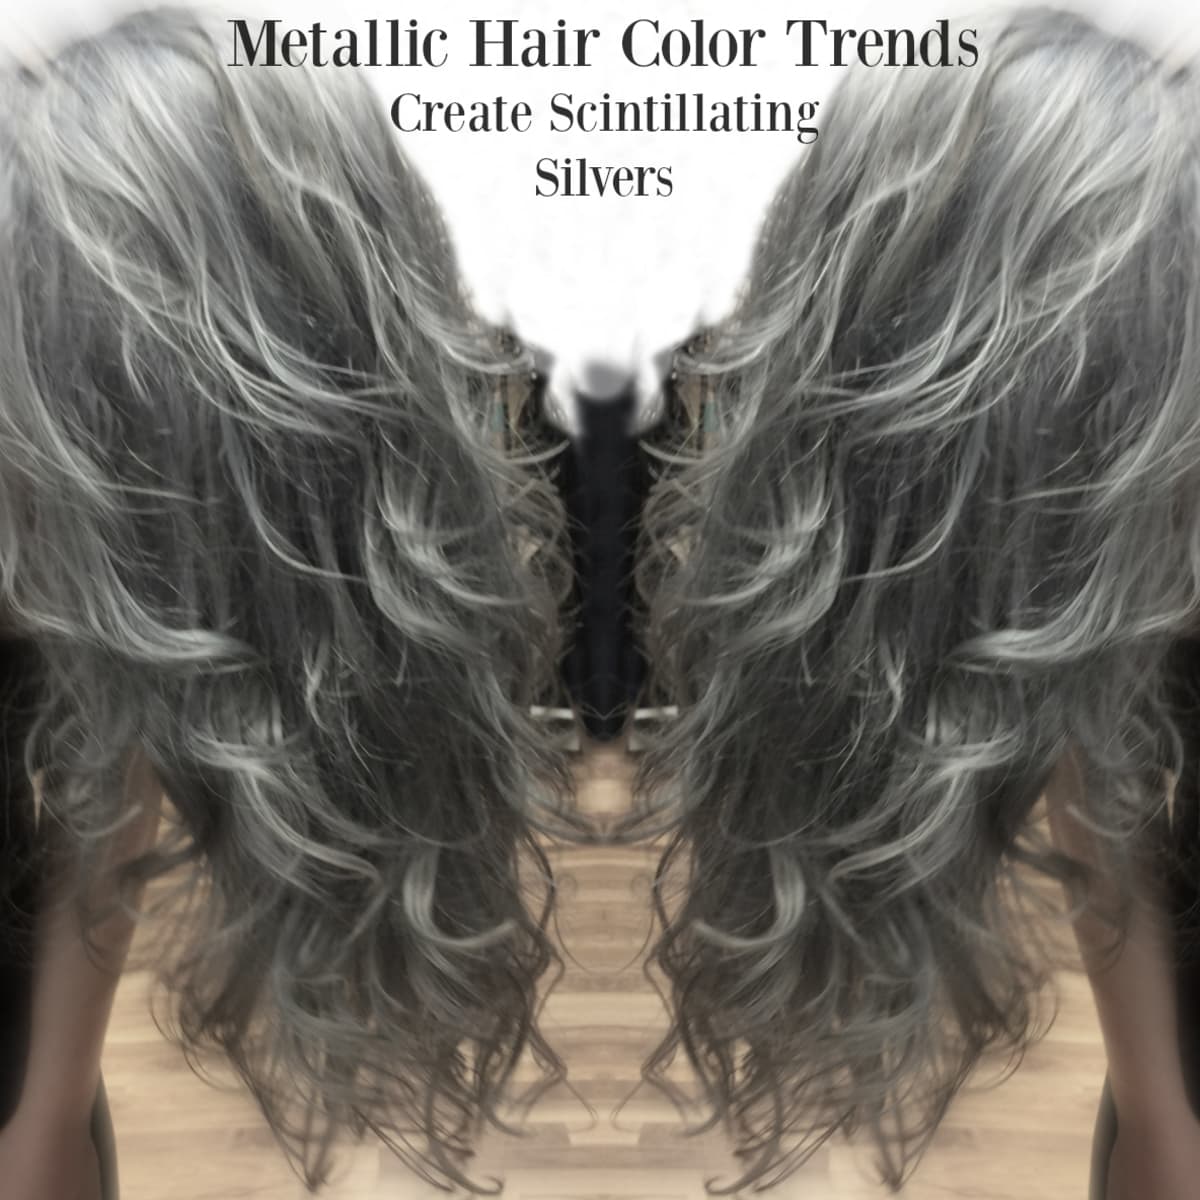 3 Metallic Hair Colors That Will Make You Look Like an A-List Star -  Bellatory